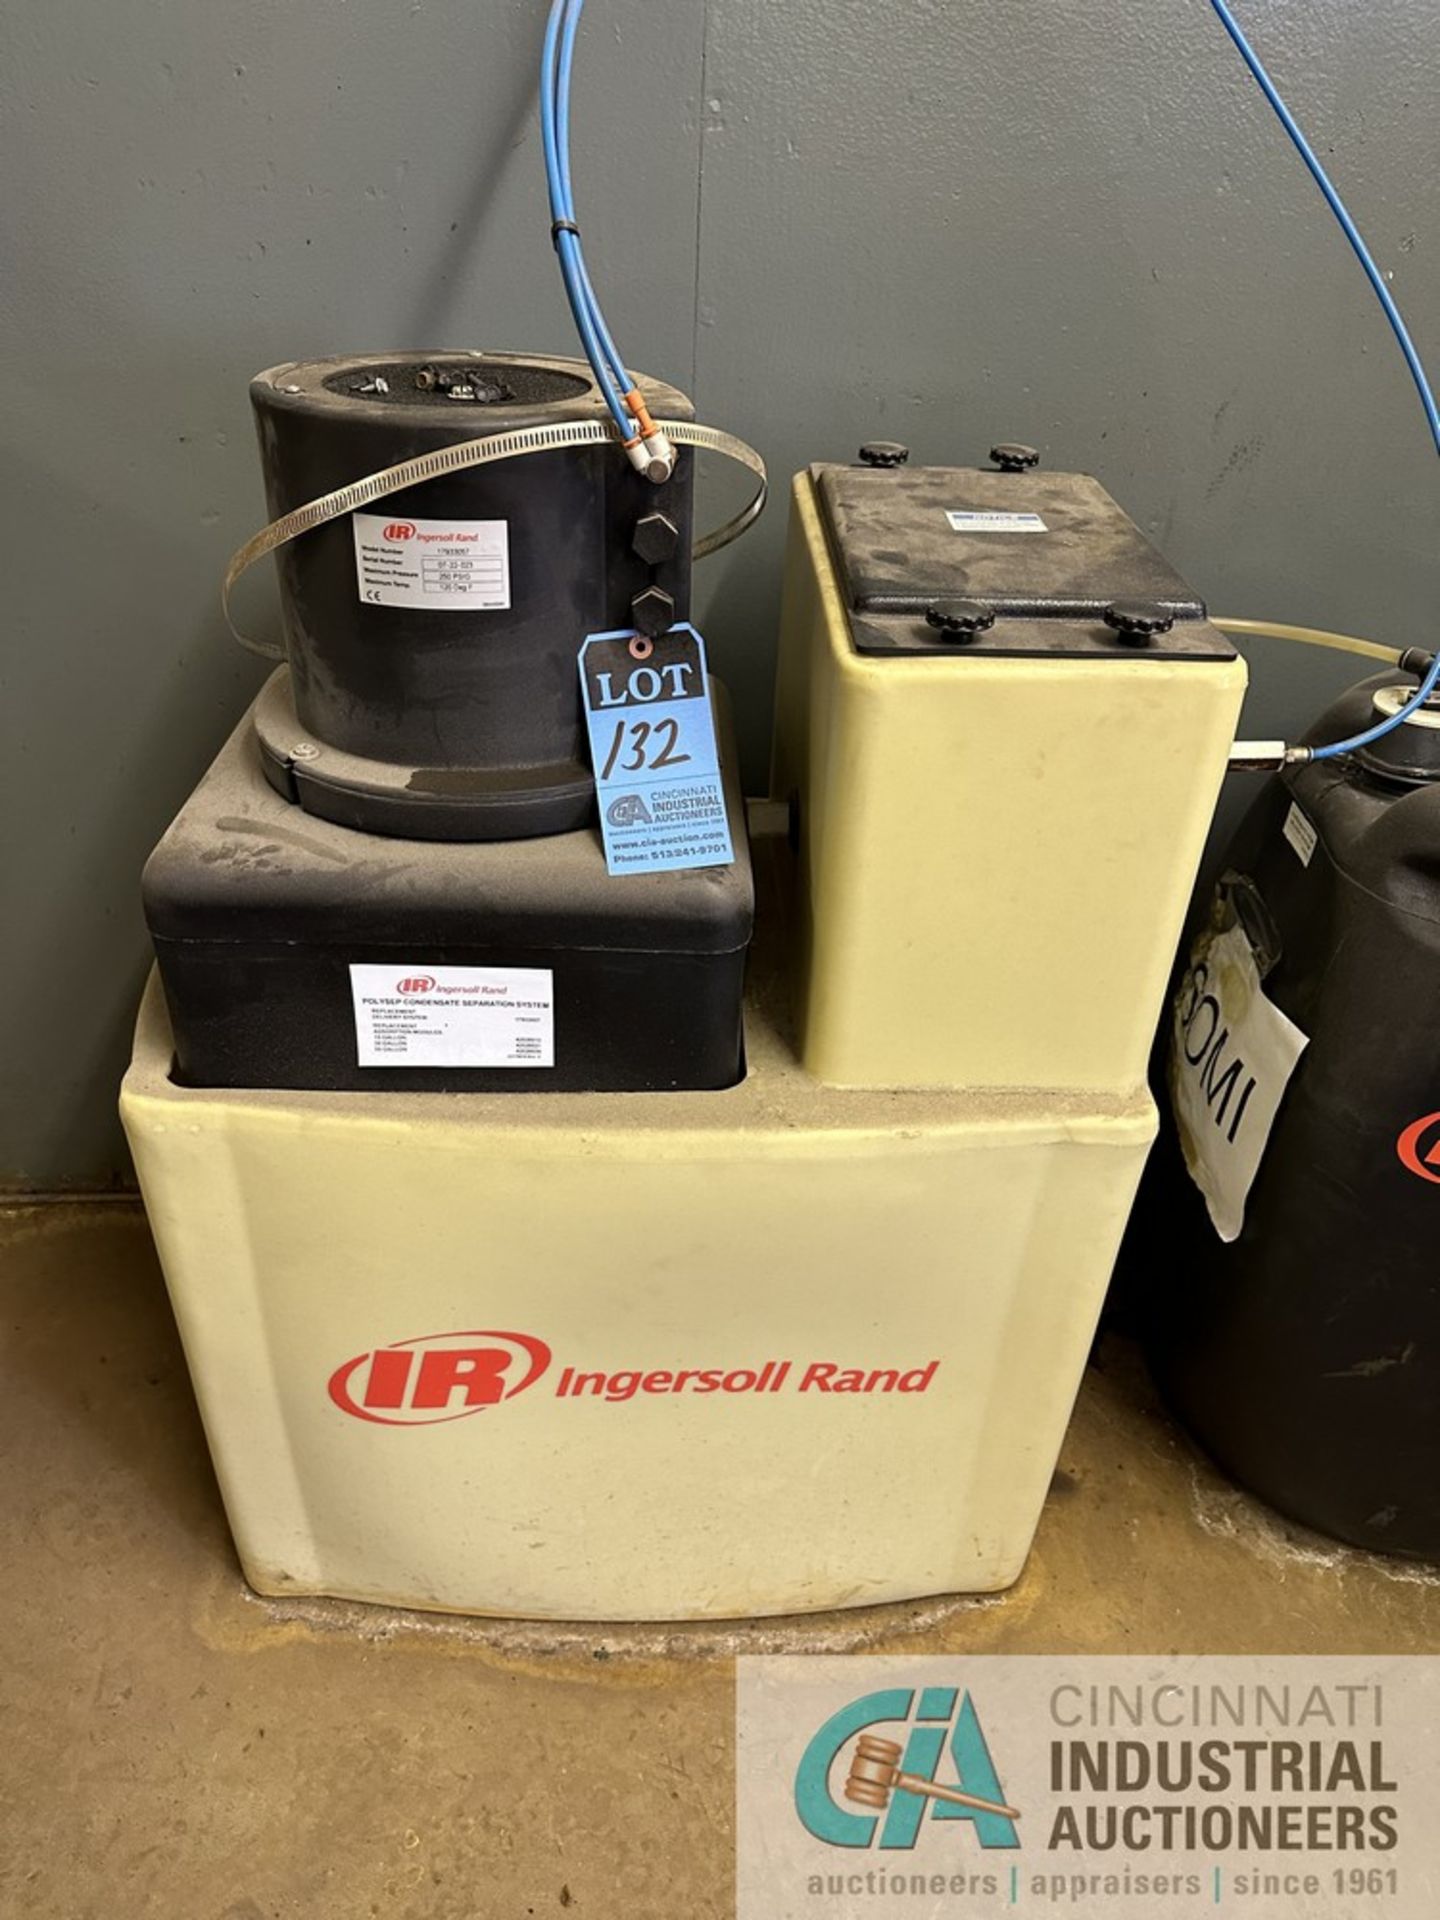 INGERSOLL RAND POLYSED CONDENSATE SEPERATION TANK - Located in air compressor room